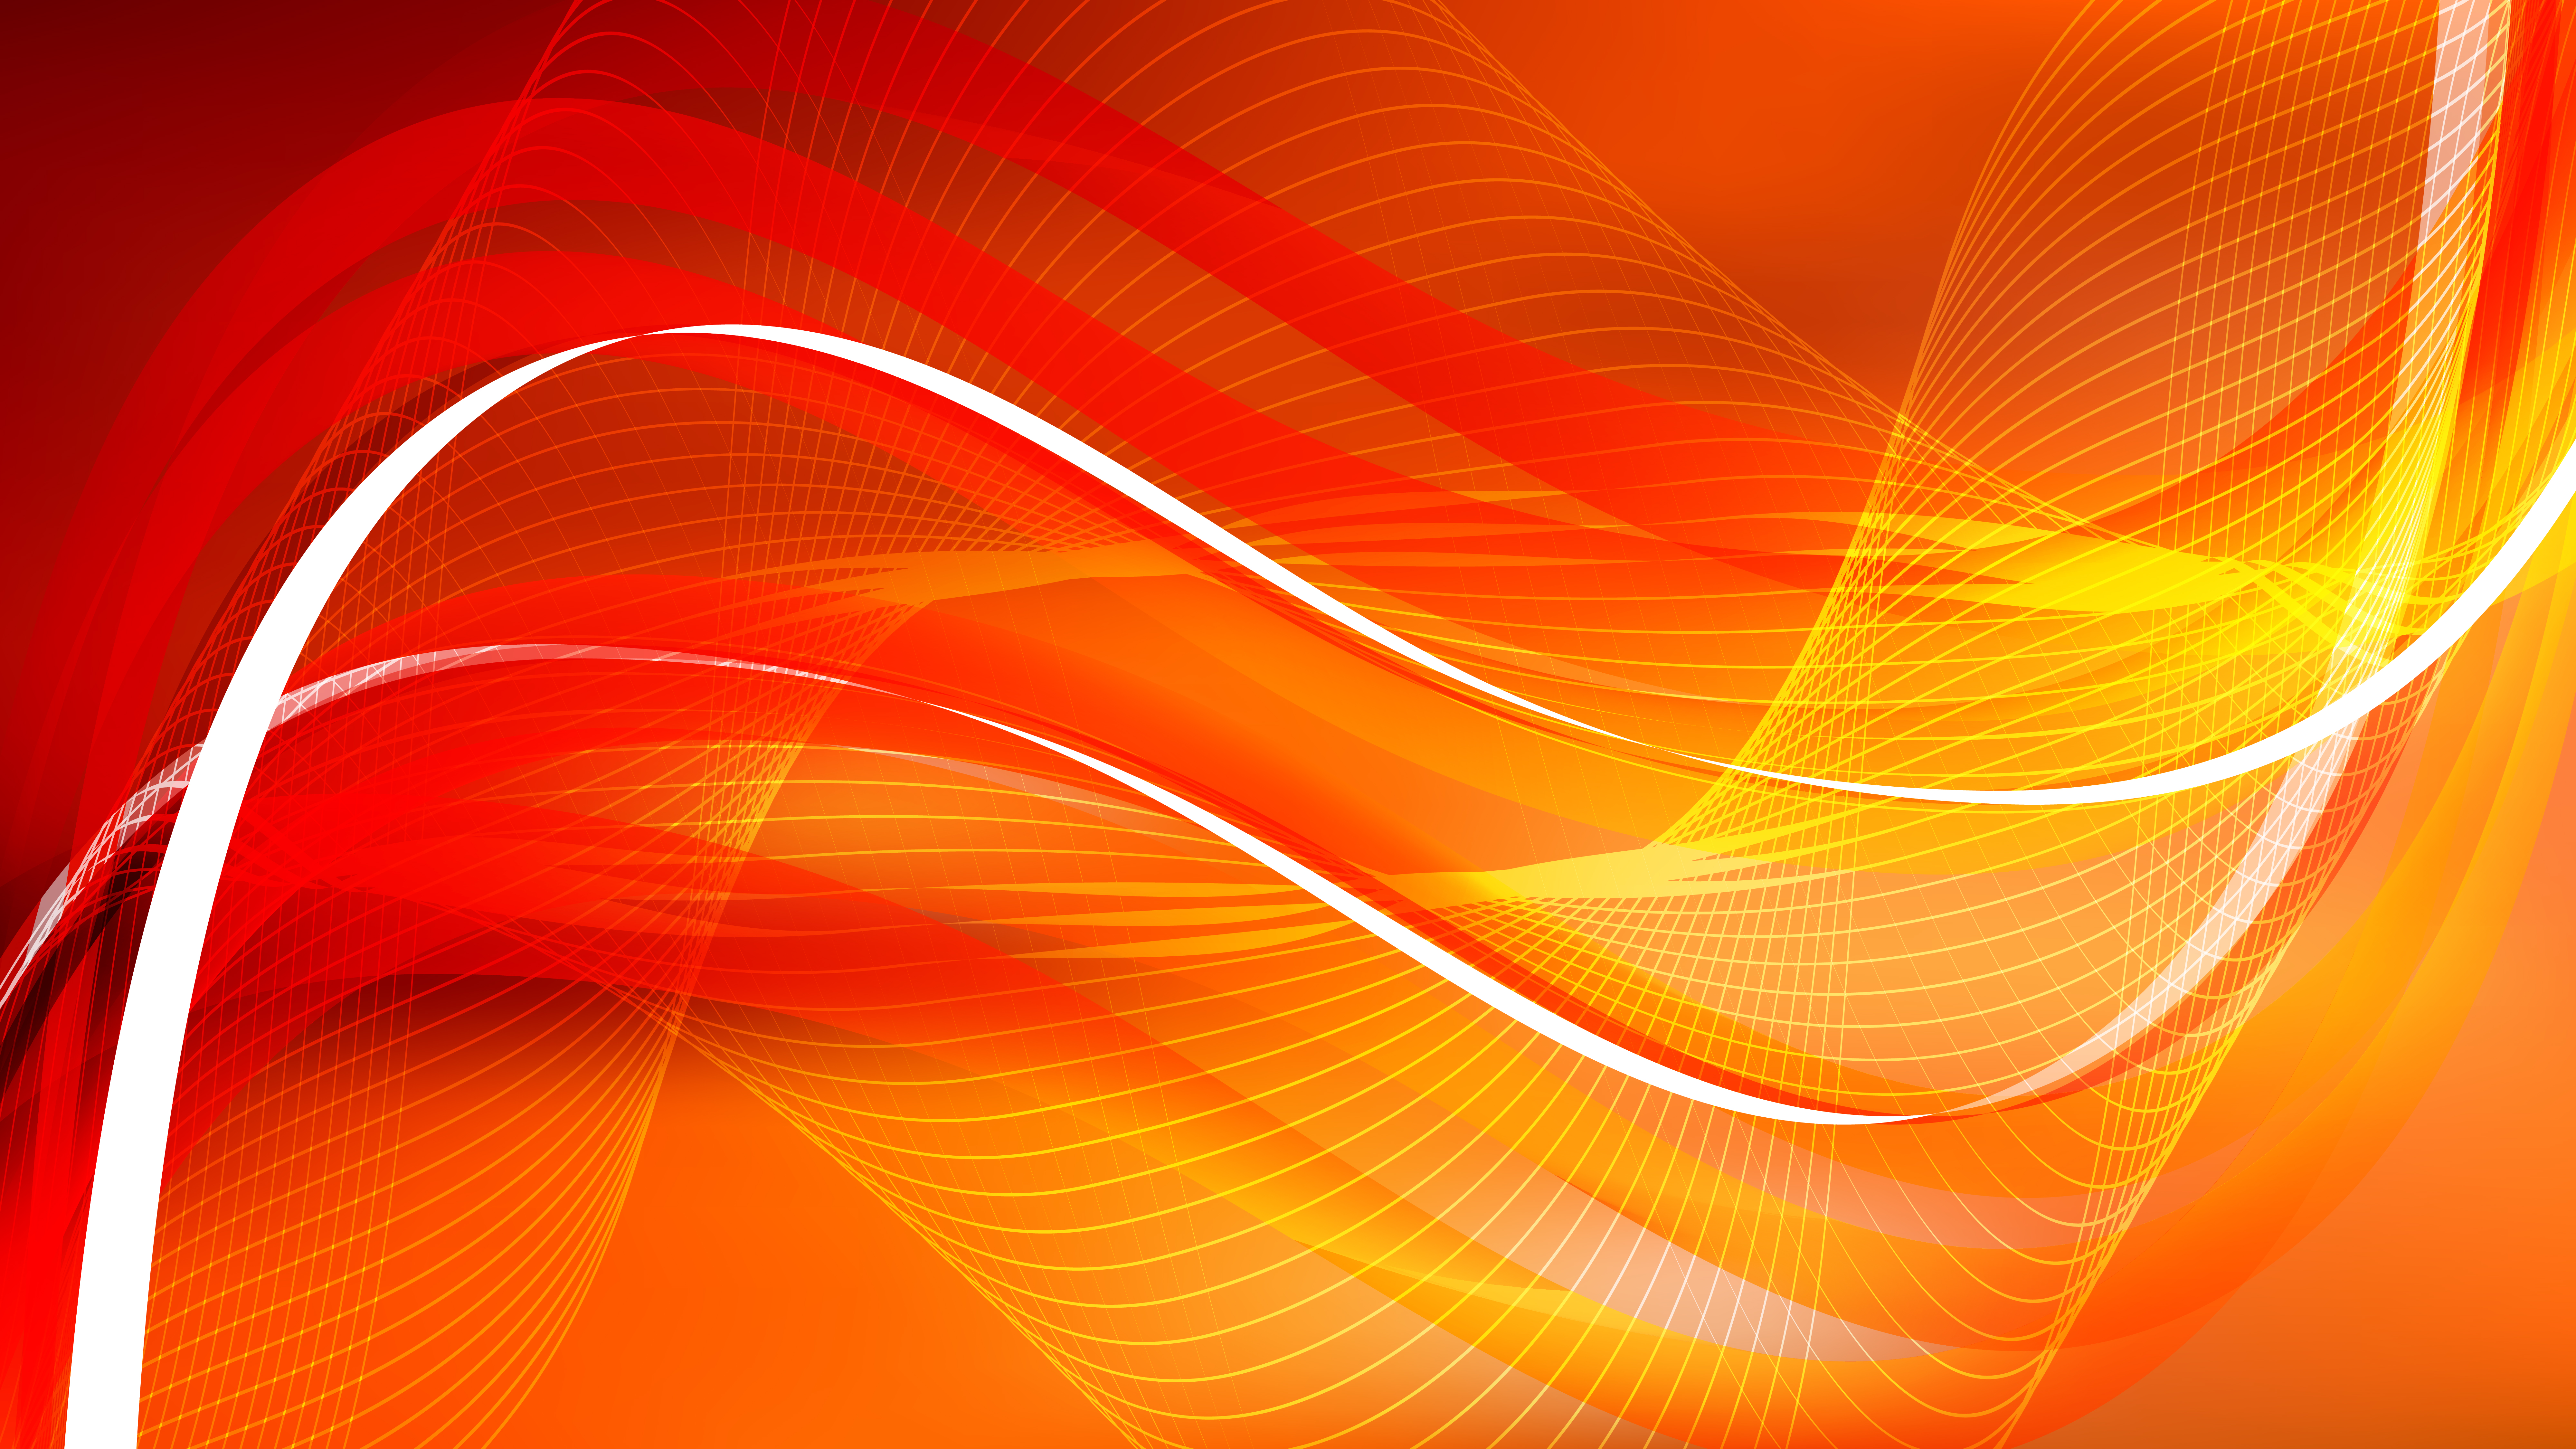 Free Abstract Red and Orange Curved Lines Background Vector Illustration